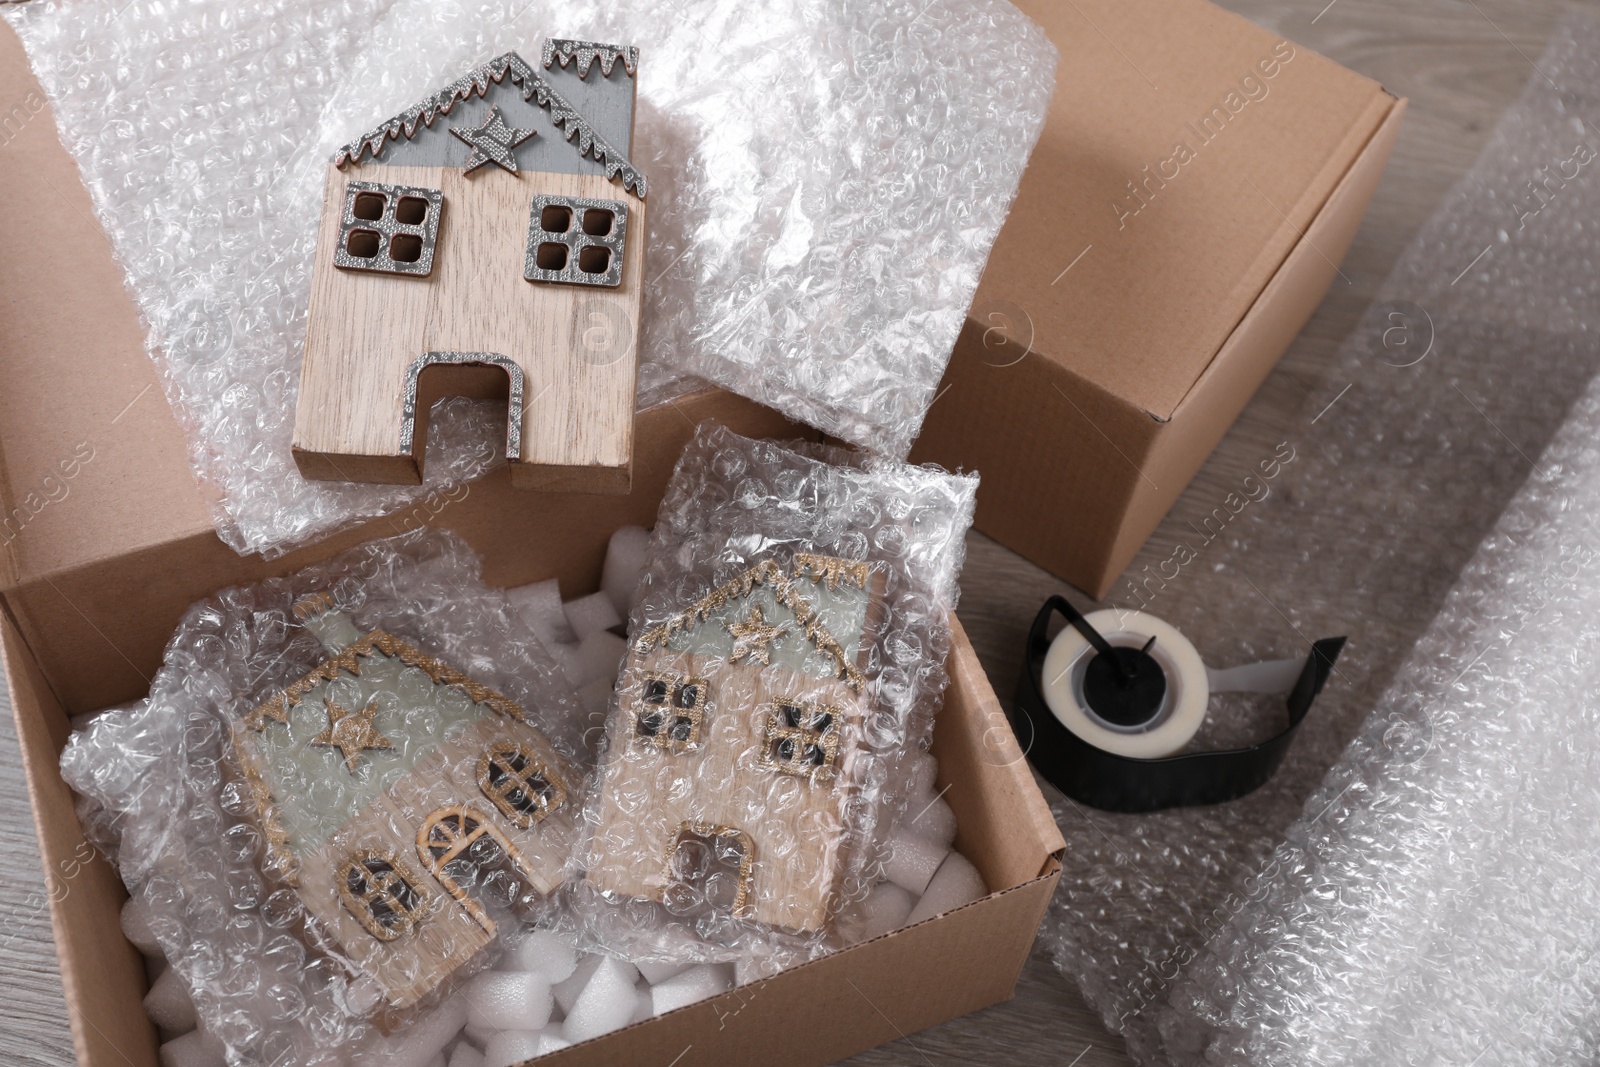 Photo of Open box with decorative house figures, adhesive tape, foam peanuts and bubble wrap on wooden table